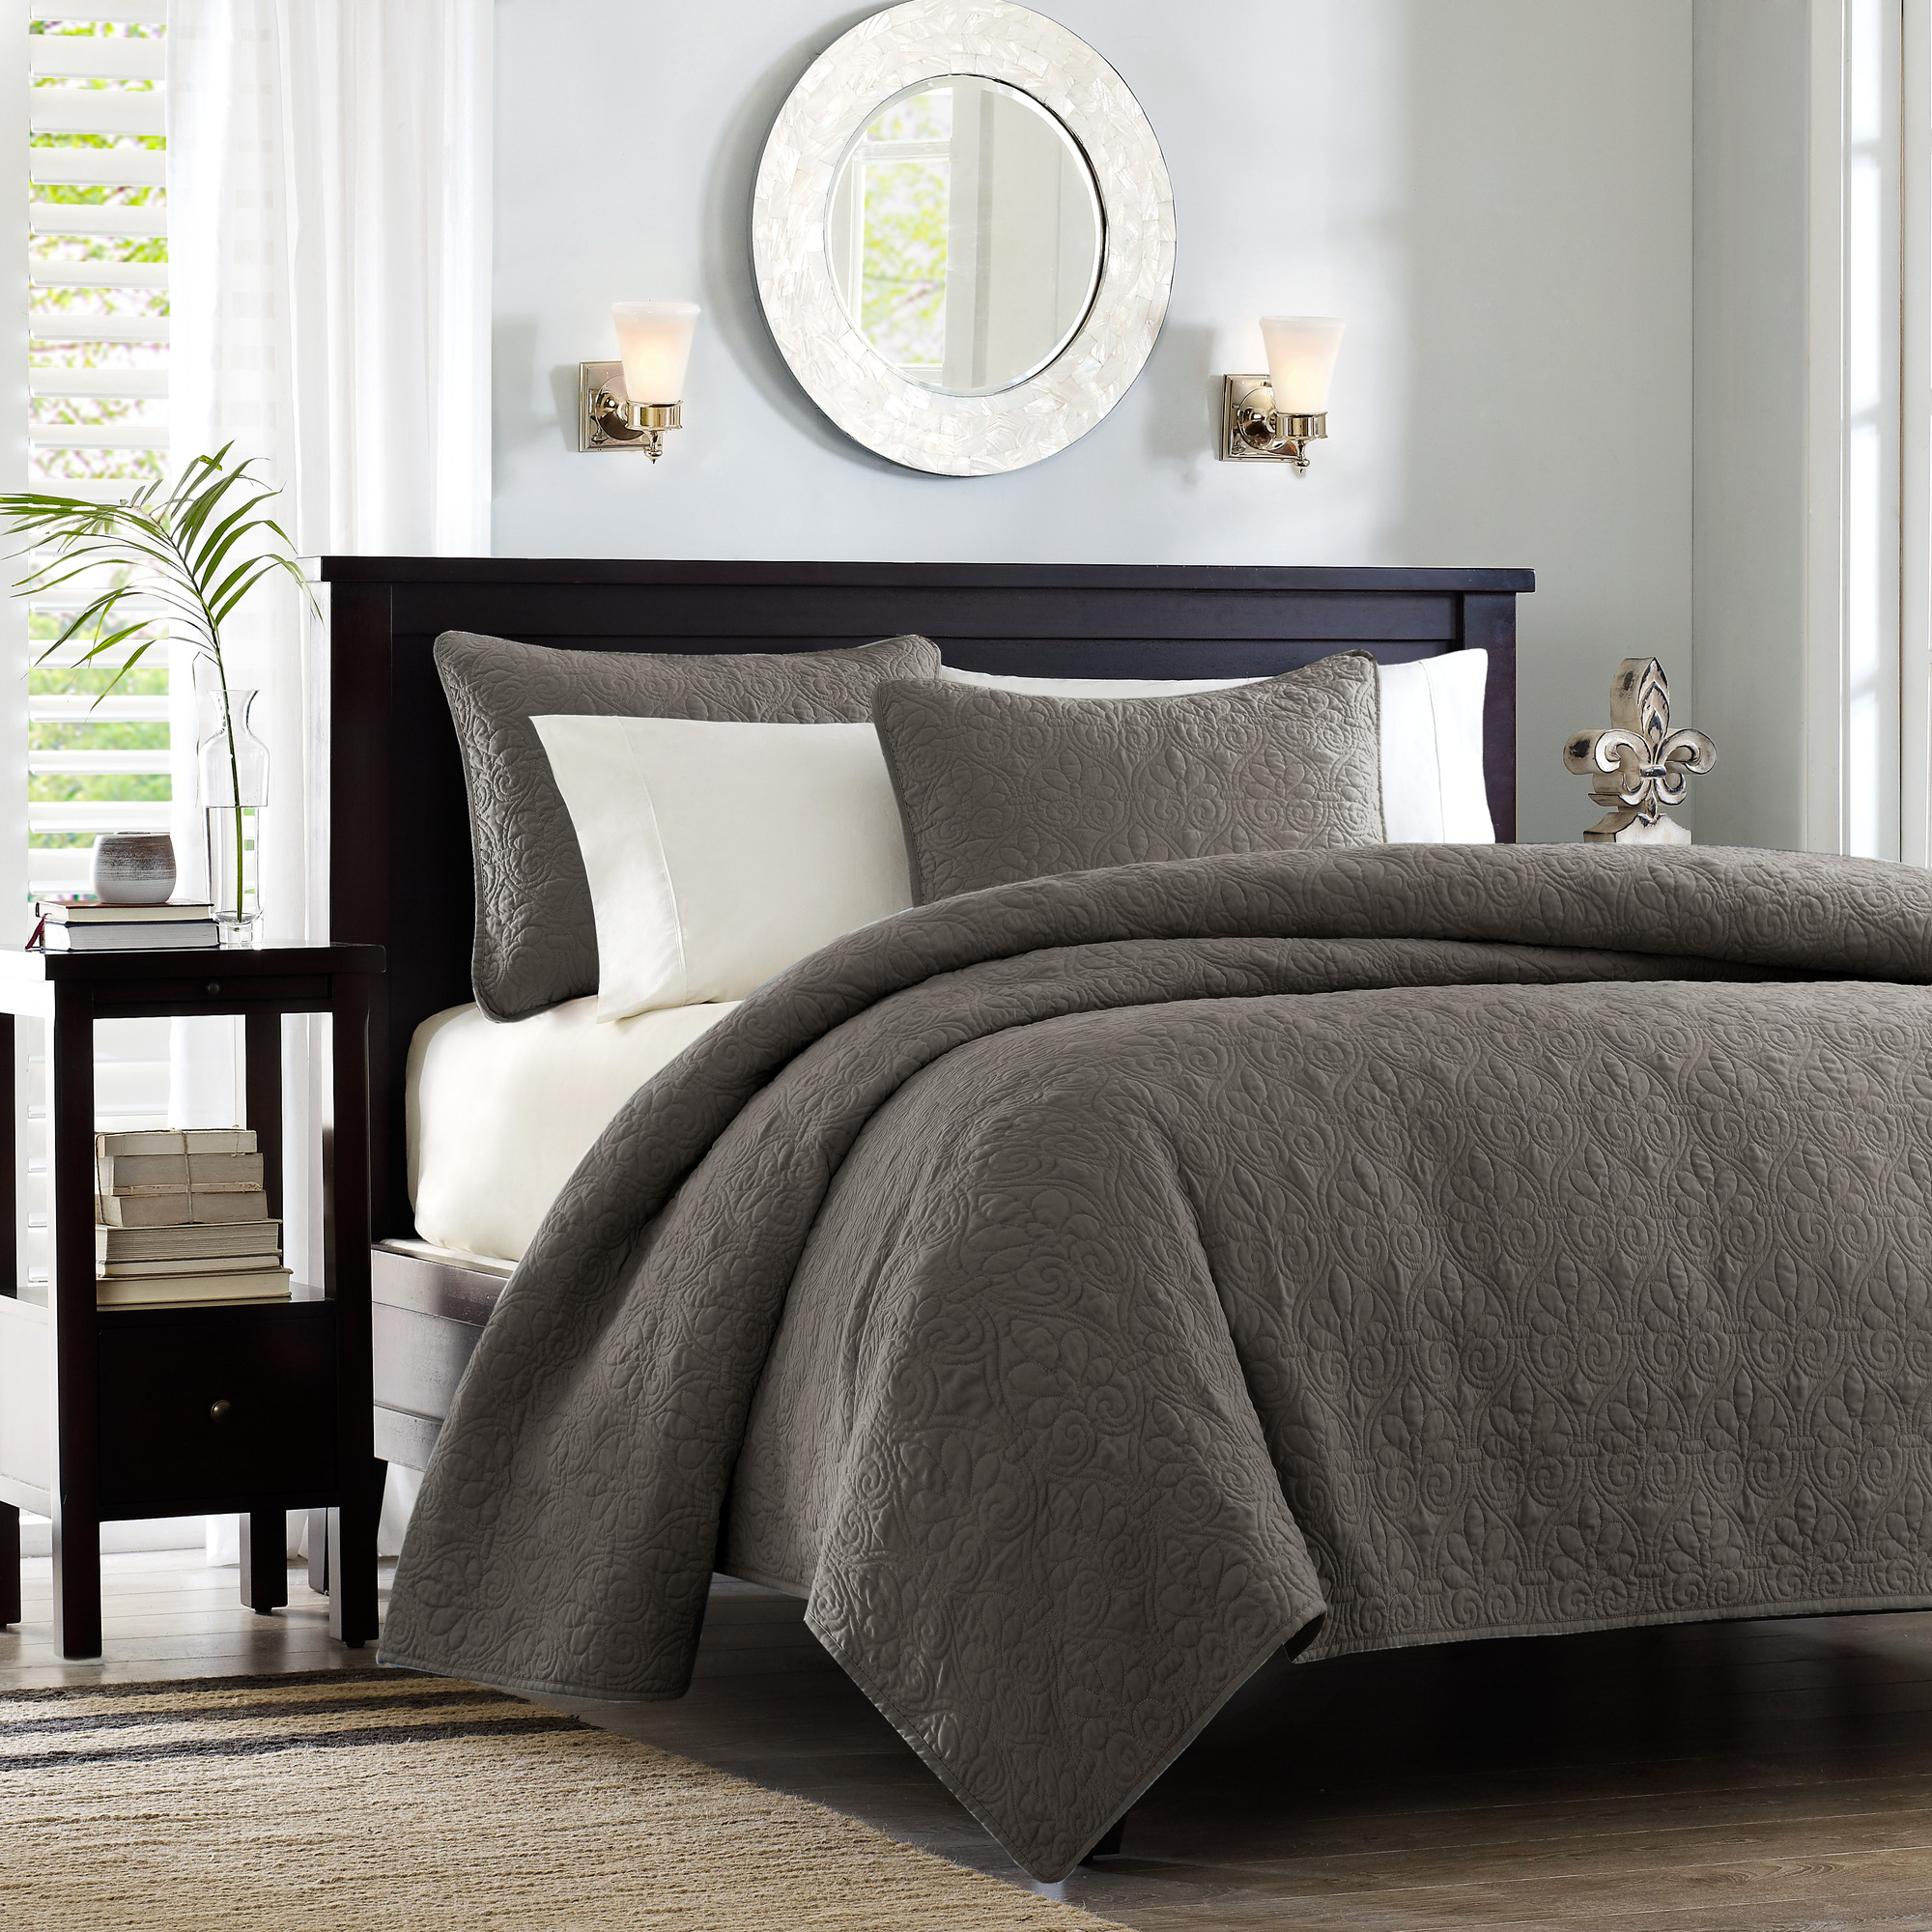 Home Essence Vancouver Super Soft Reversible Coverlet Set, Twin/Twin XL, Dark Grey - image 1 of 14